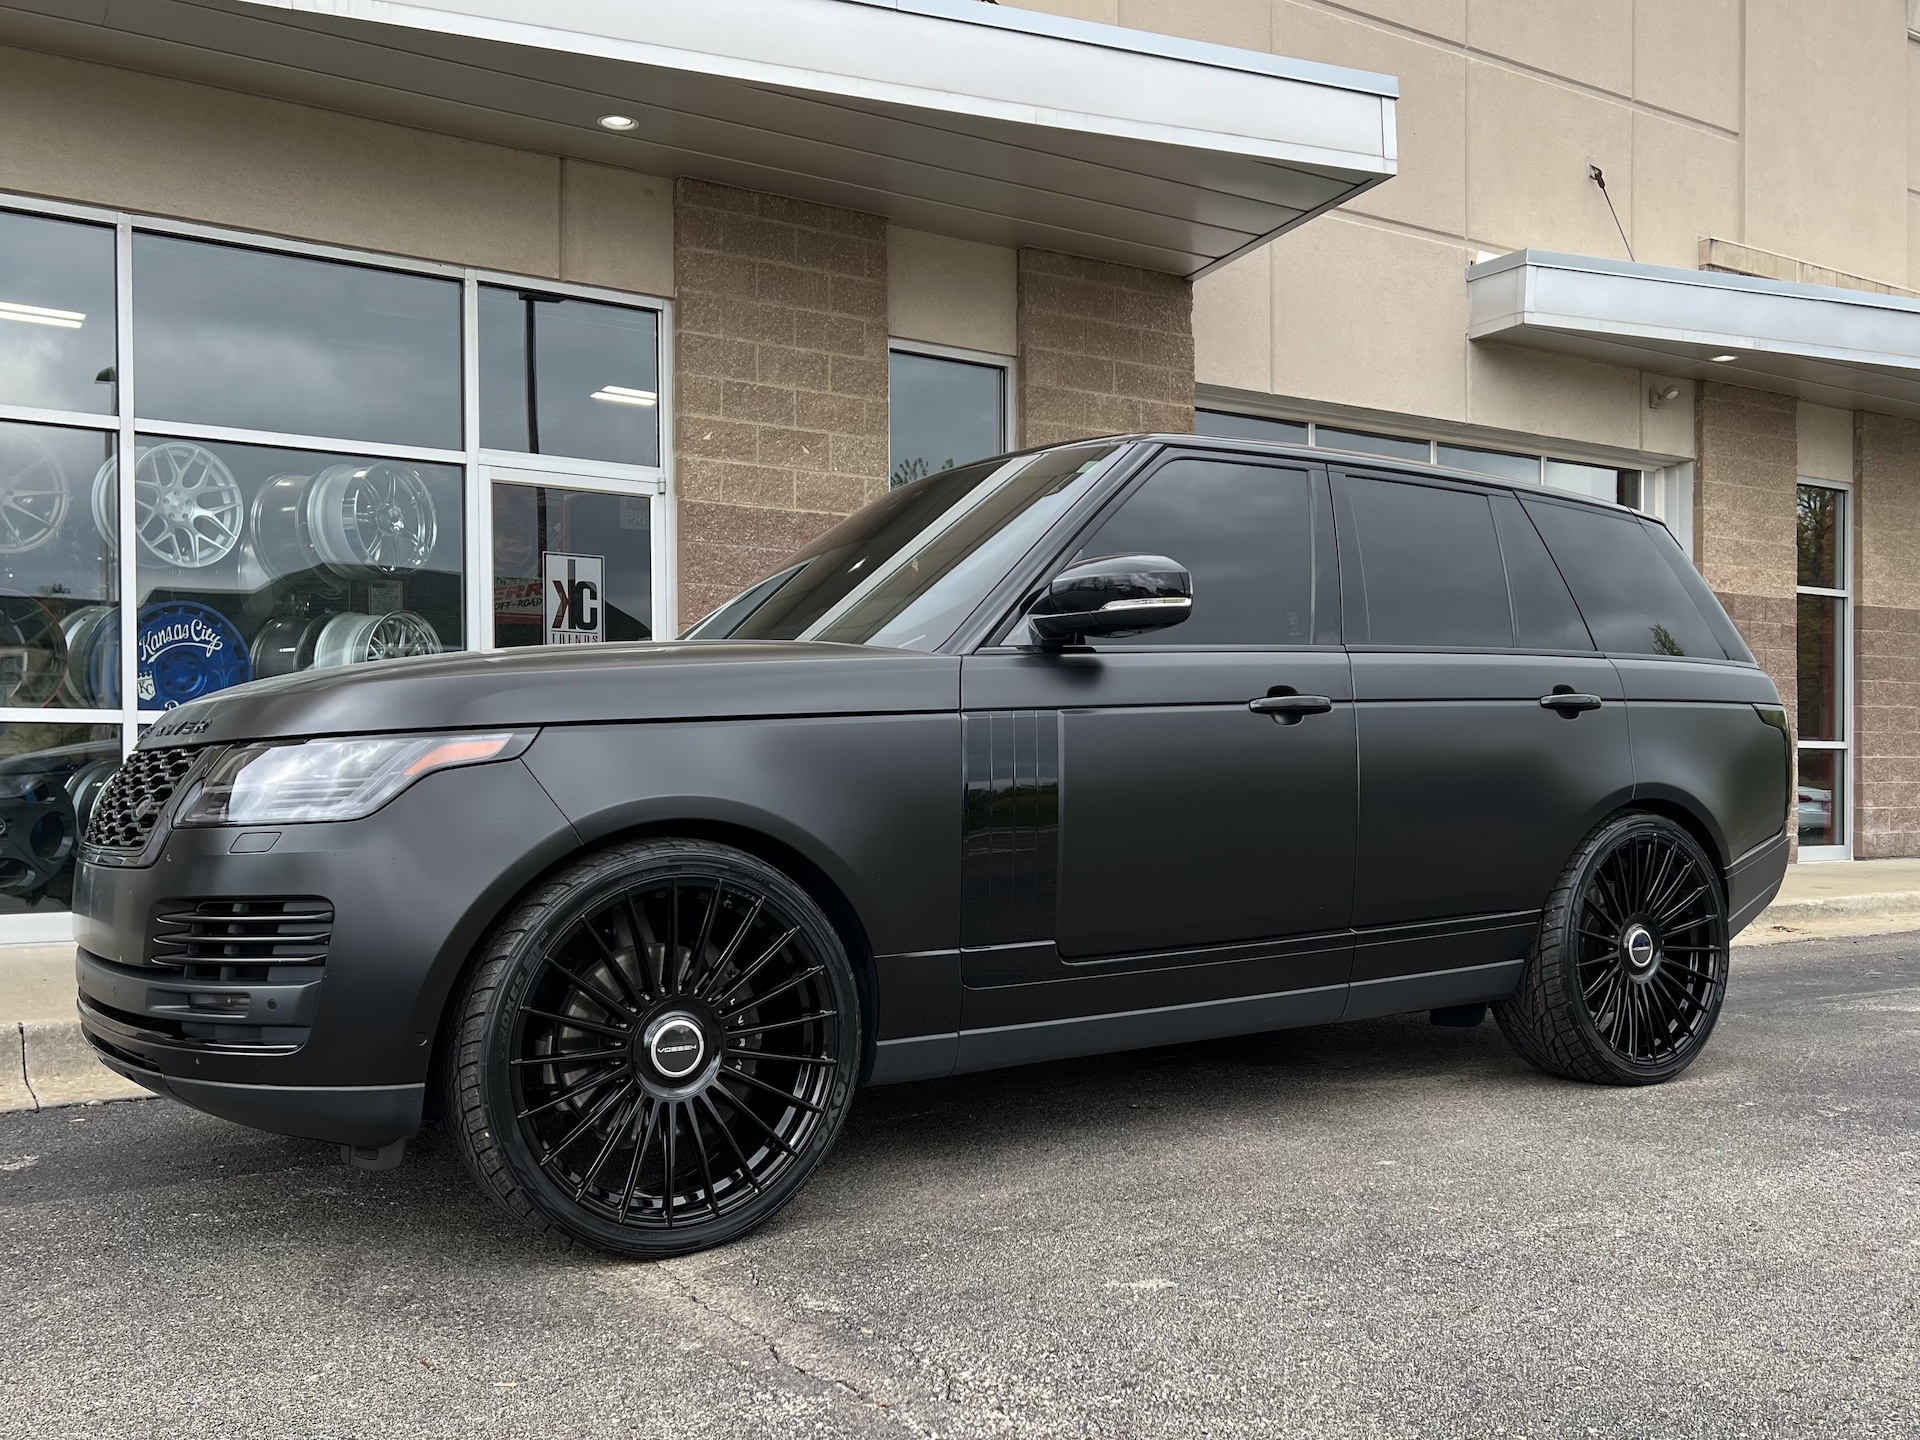  Land Rover Range Rover with Vossen Hybrid Forged HF-8